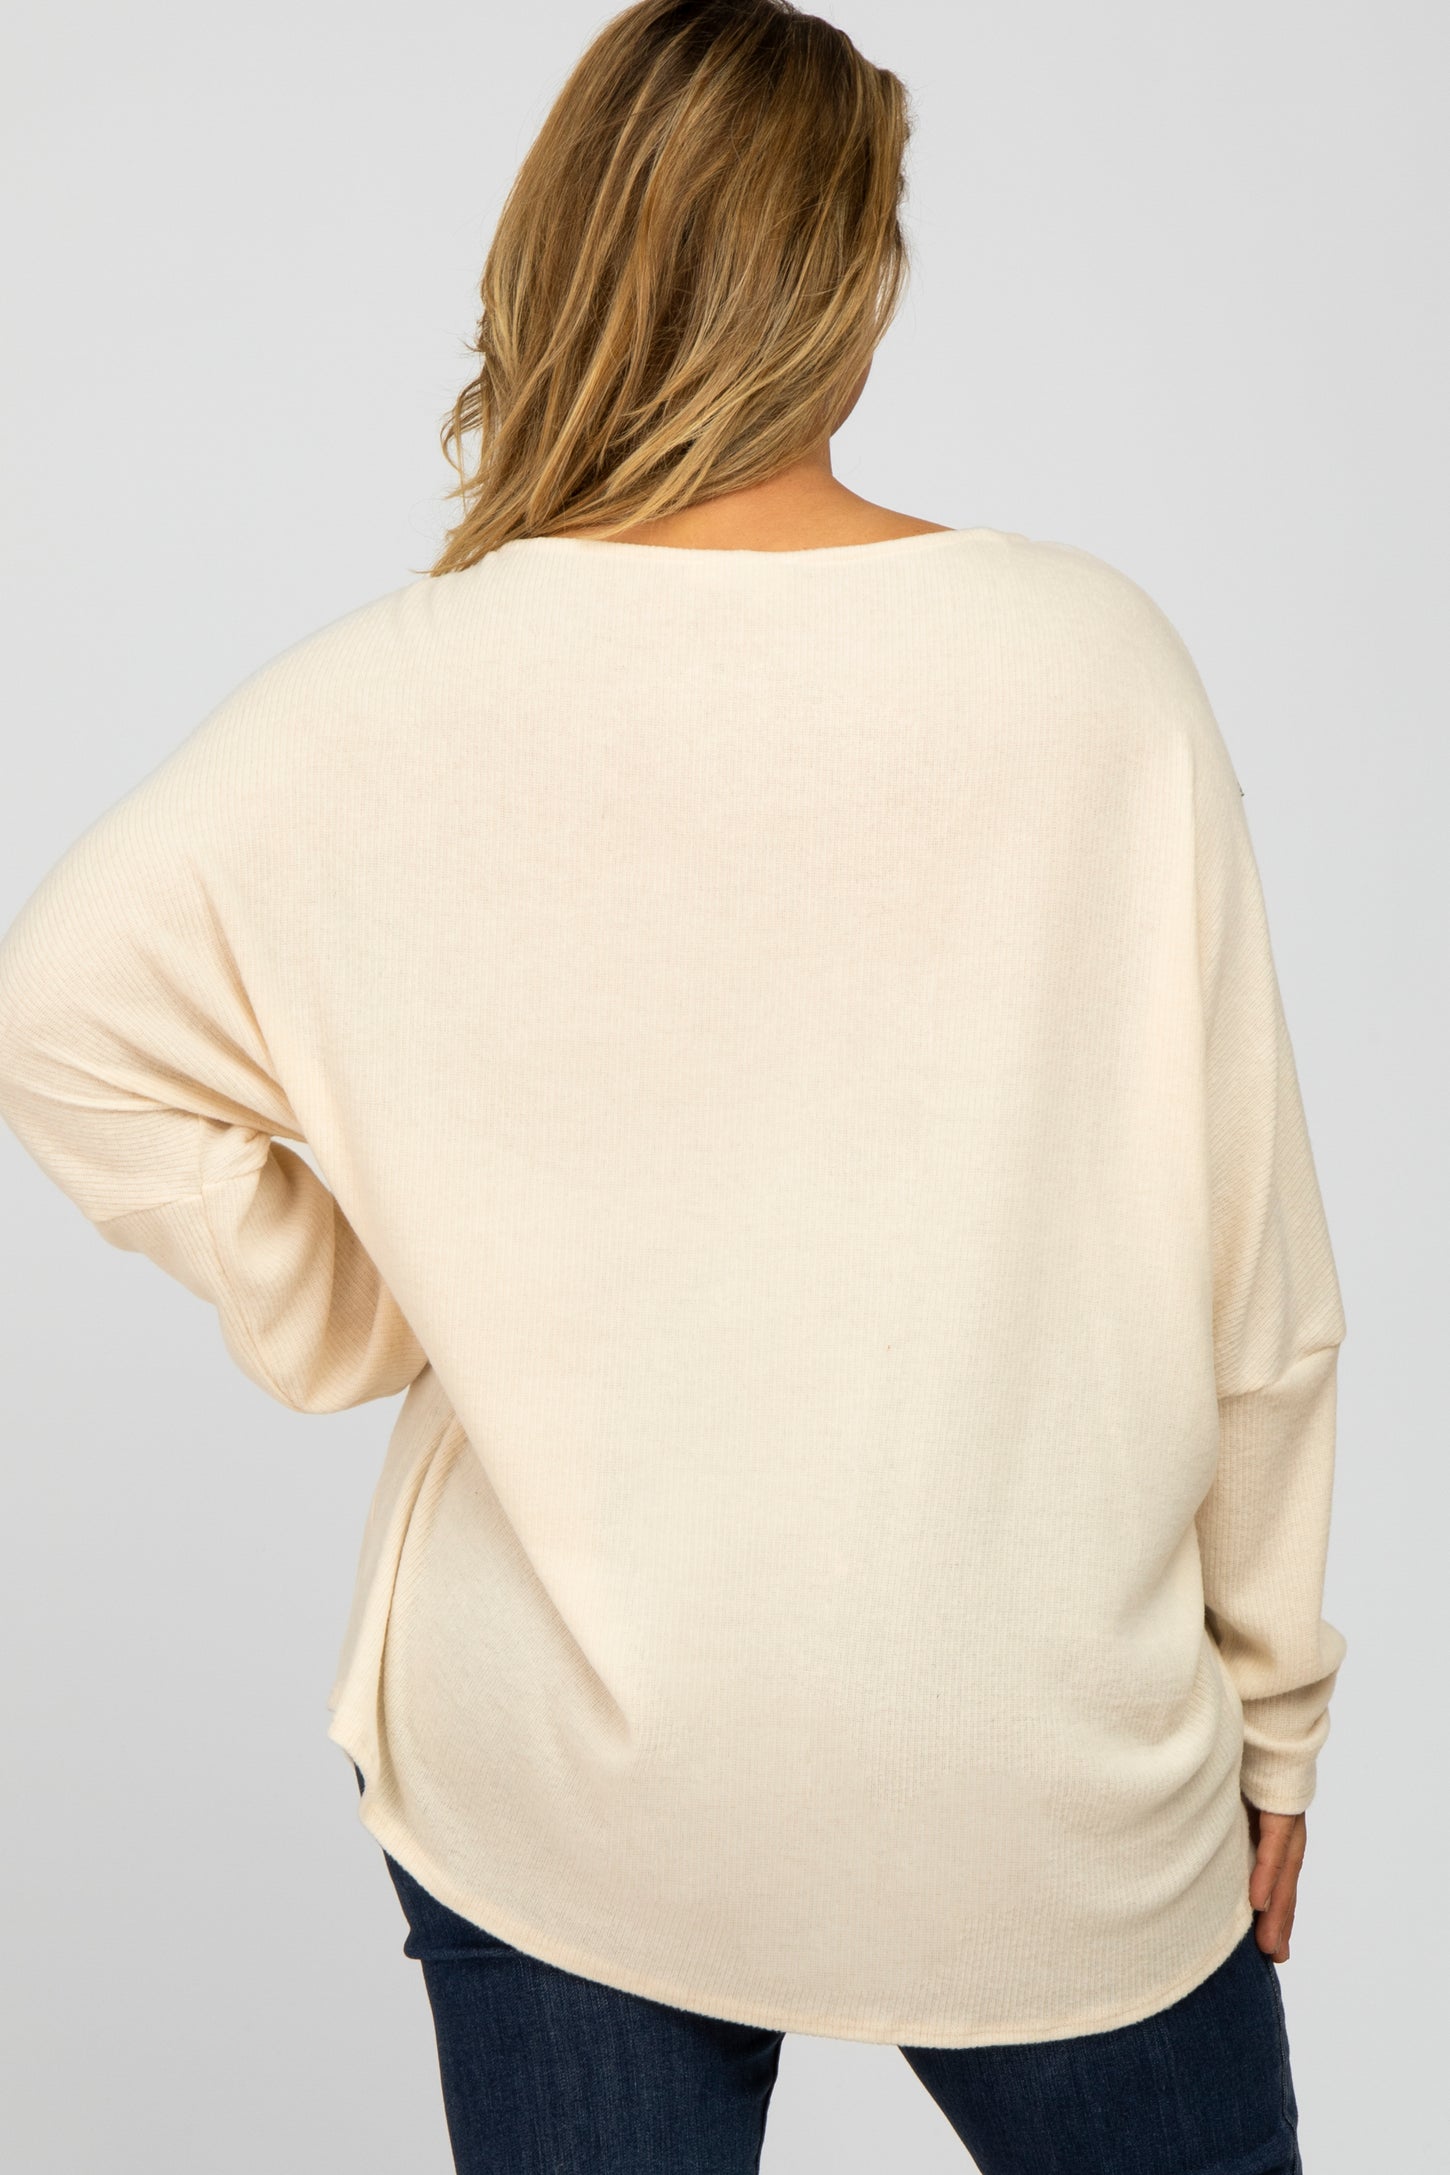 Cream Brushed Ribbed Dolman Sleeve Maternity Plus Top